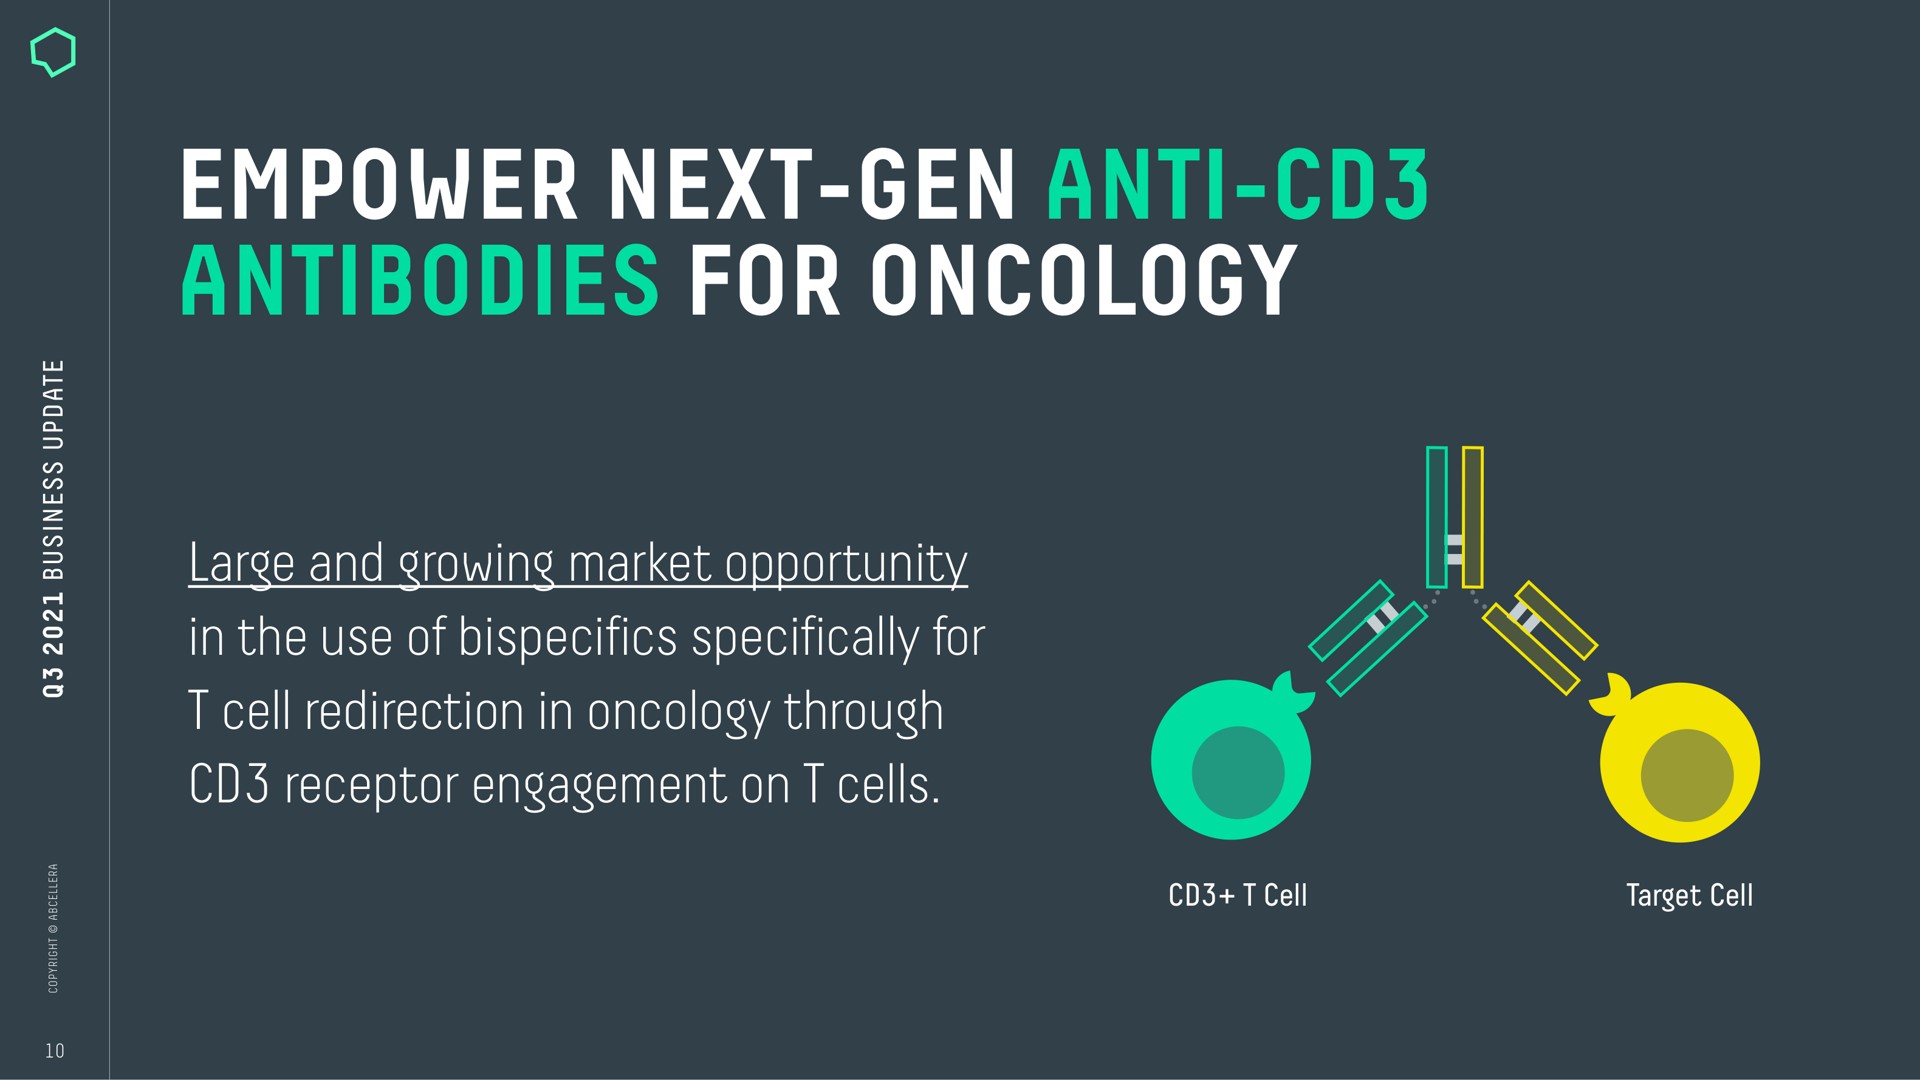 empower next gen anti antibodies for oncology large and growing market opportunity in the use of specifically for cell redirection in oncology through receptor engagement on cells anti i | AbCellera